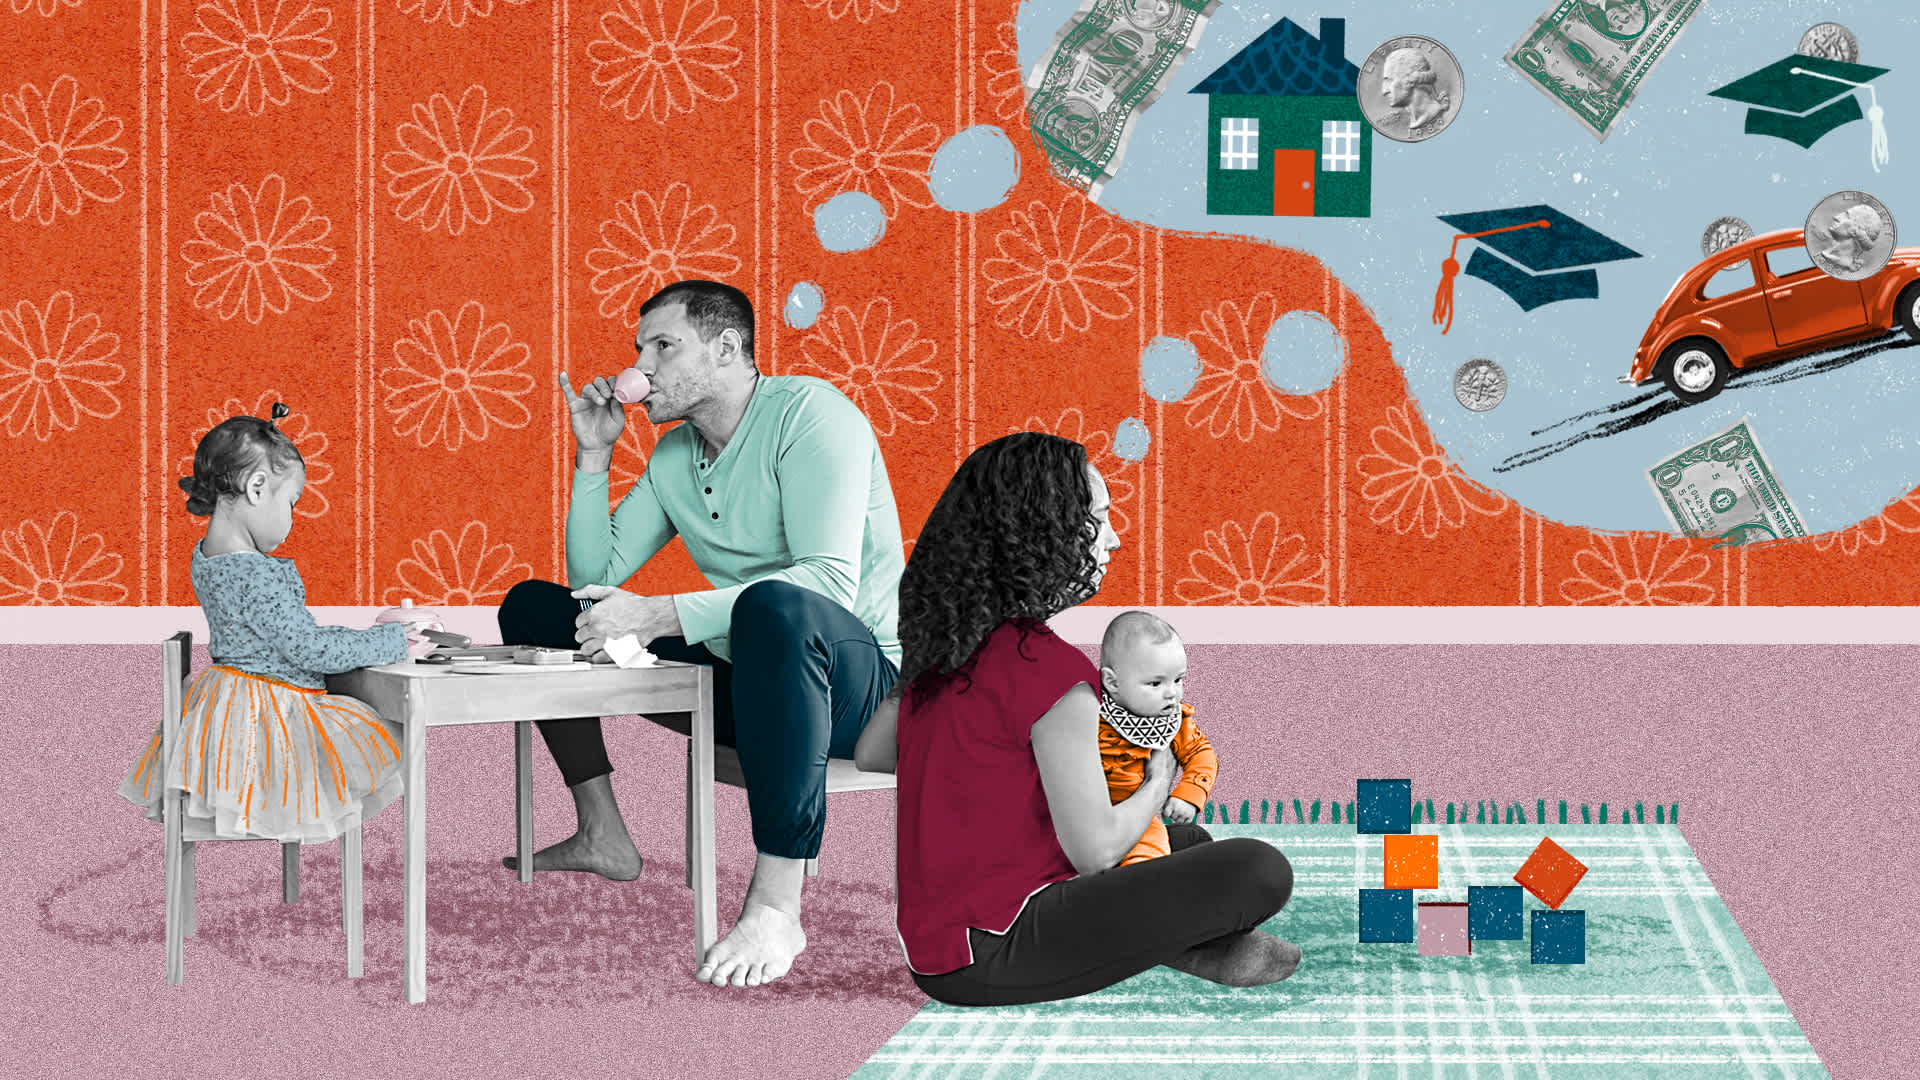 a toddler and father seated at a small table on the left a mother and baby seated on a blanket on the right. the mother and father have a thought bubble with a house, graduation cap, car, and money